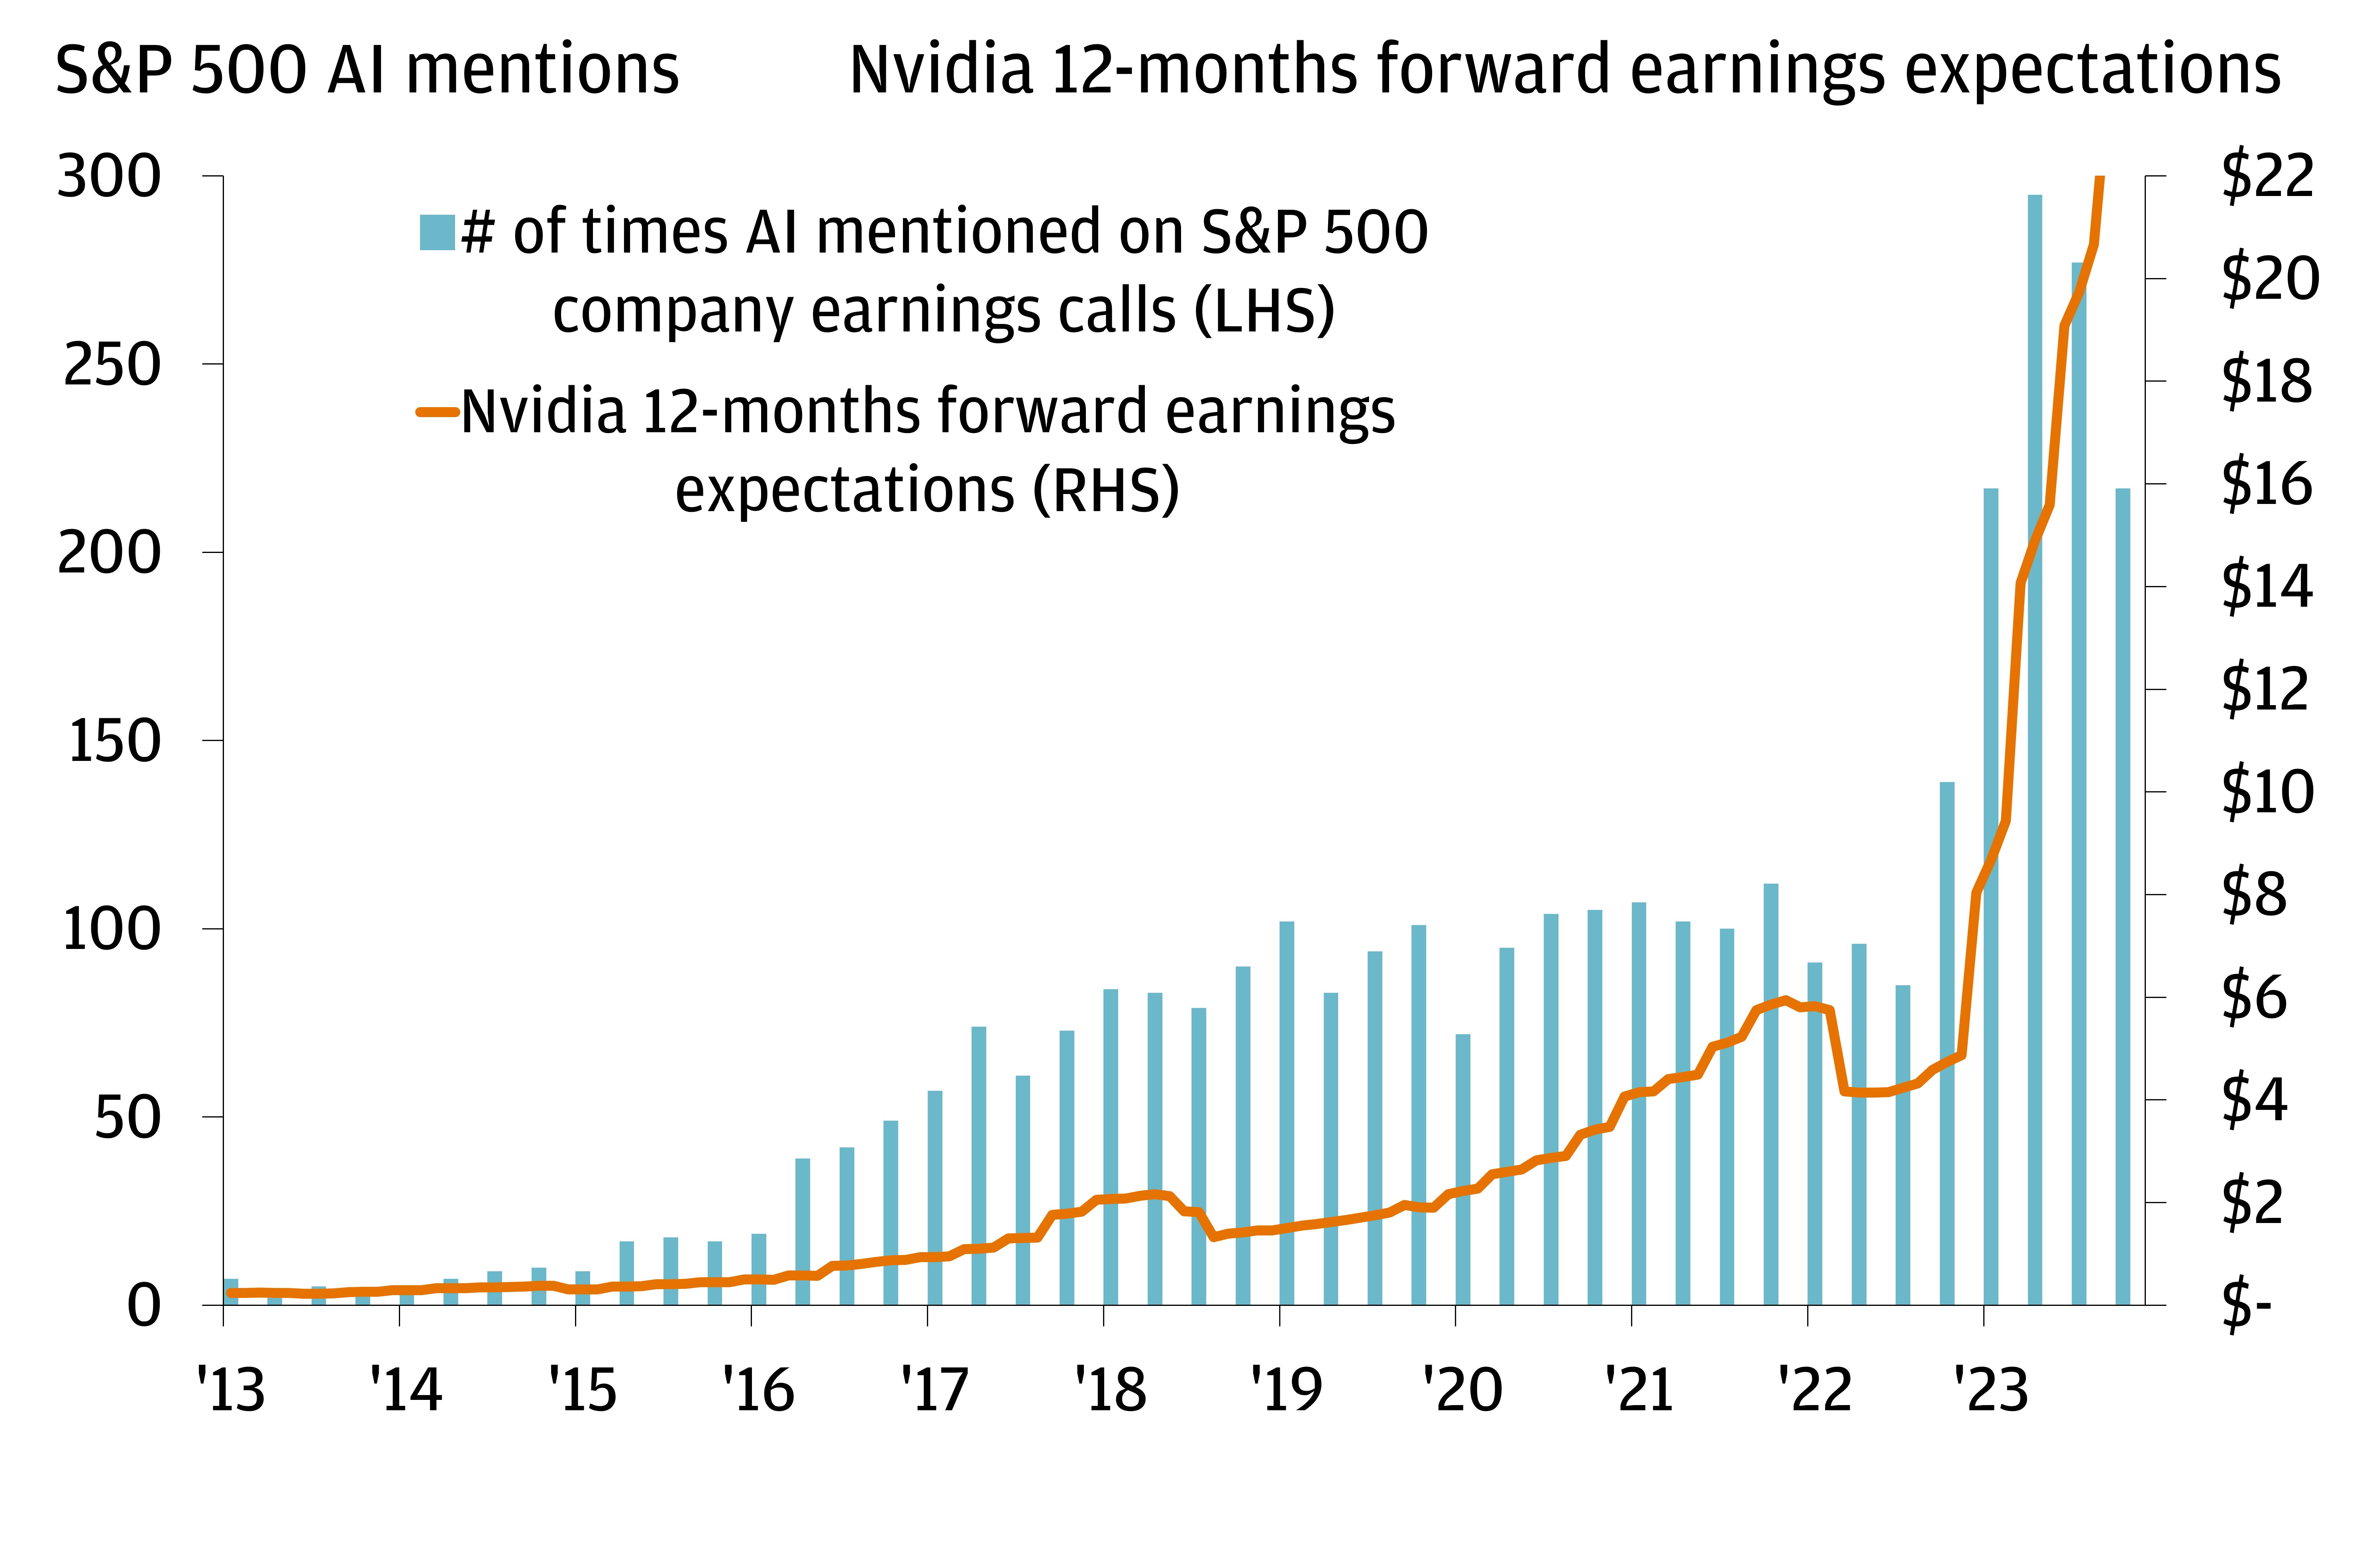 The chart describes the # of times AI mentioned on S&P 500 company earnings calls and Nvidia 12-months forward earnings expectations. 